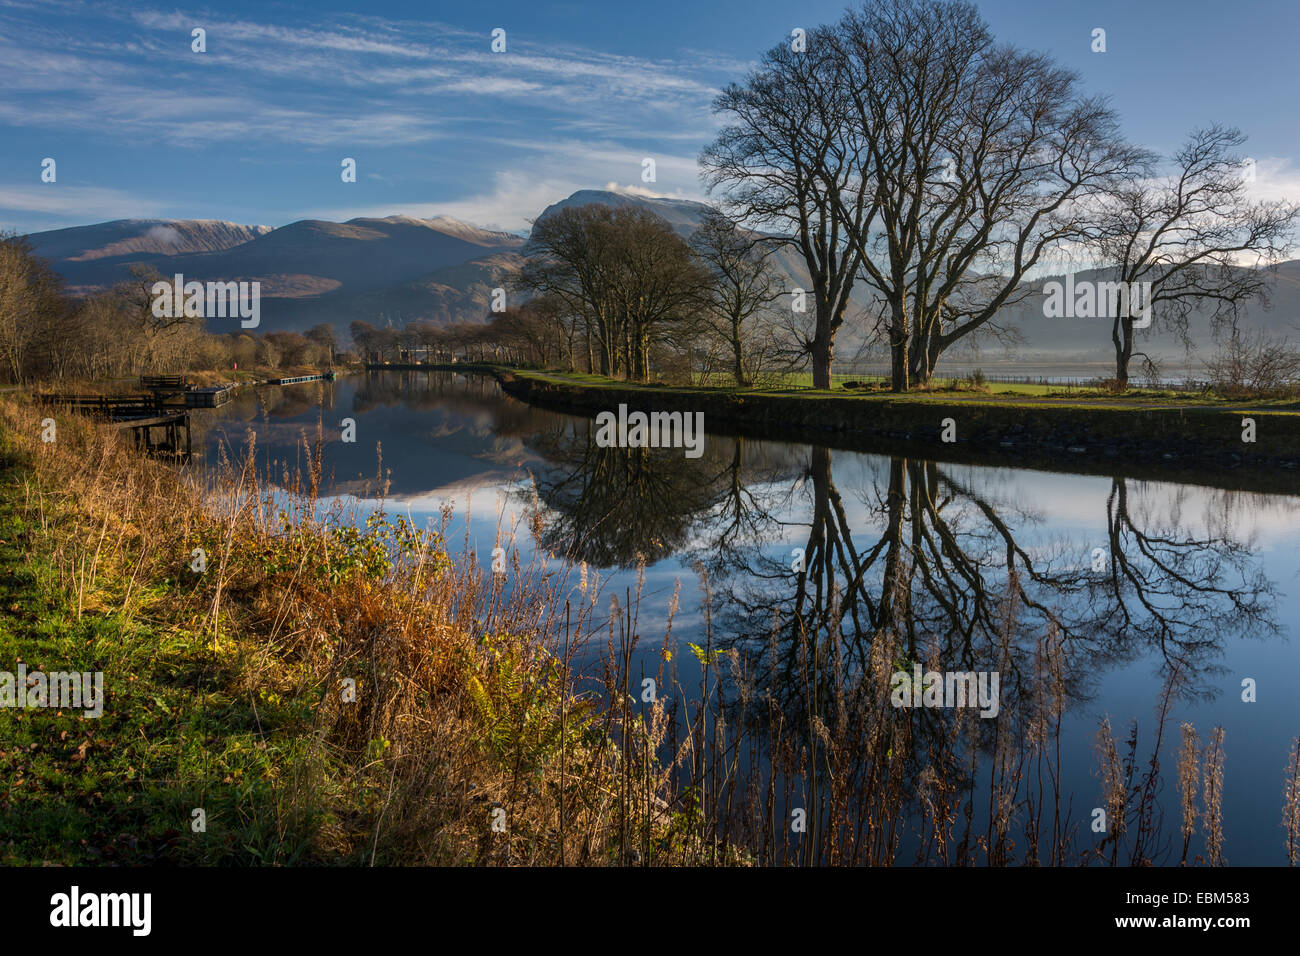 Caledonian Canal, Corpach, Fort William, Scotland, United Kingdom Banque D'Images